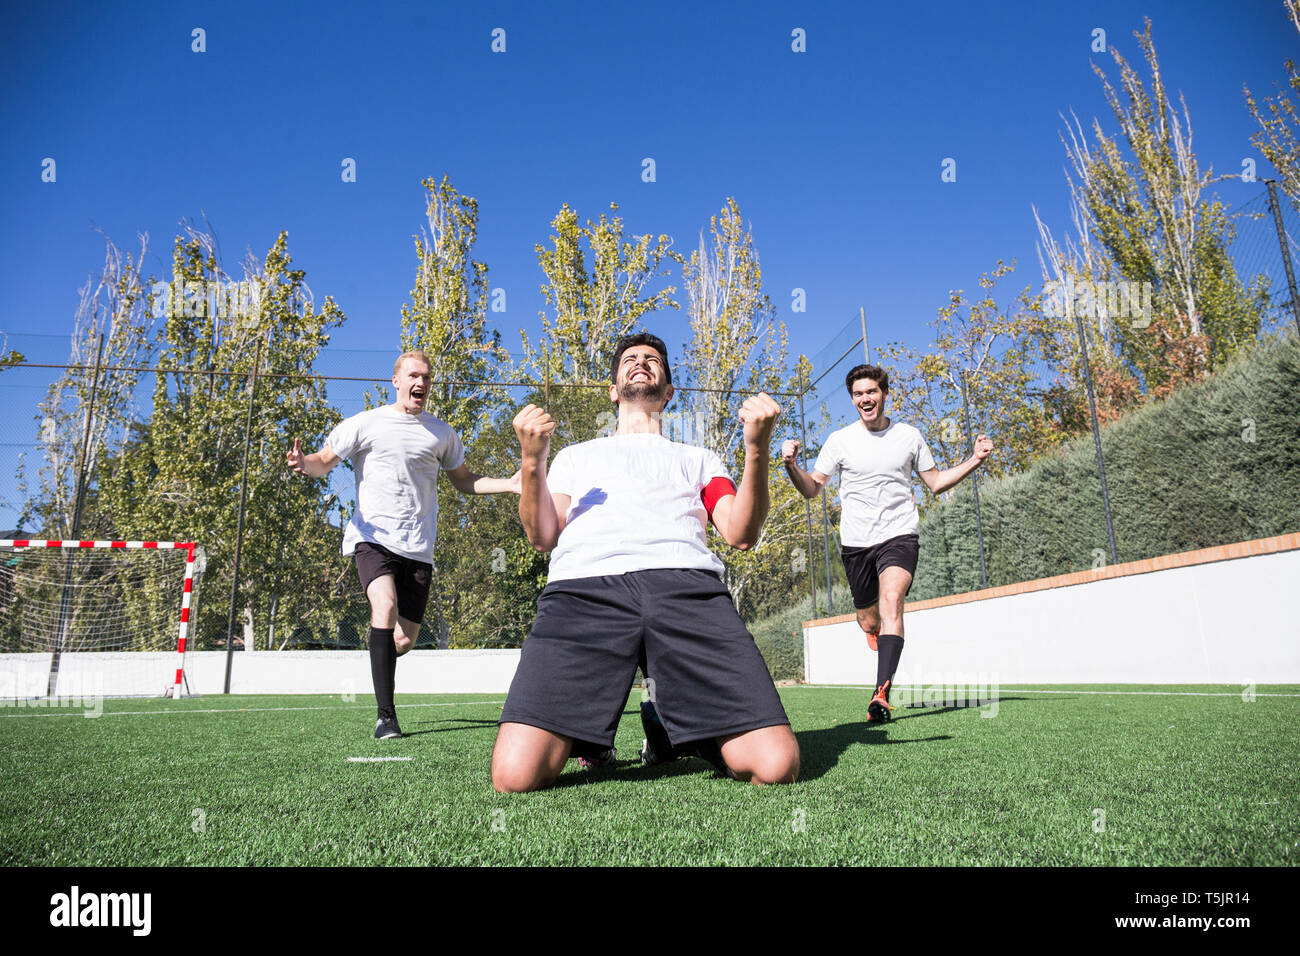 Football player celebrating a goal on the grass during a match Stock Photo